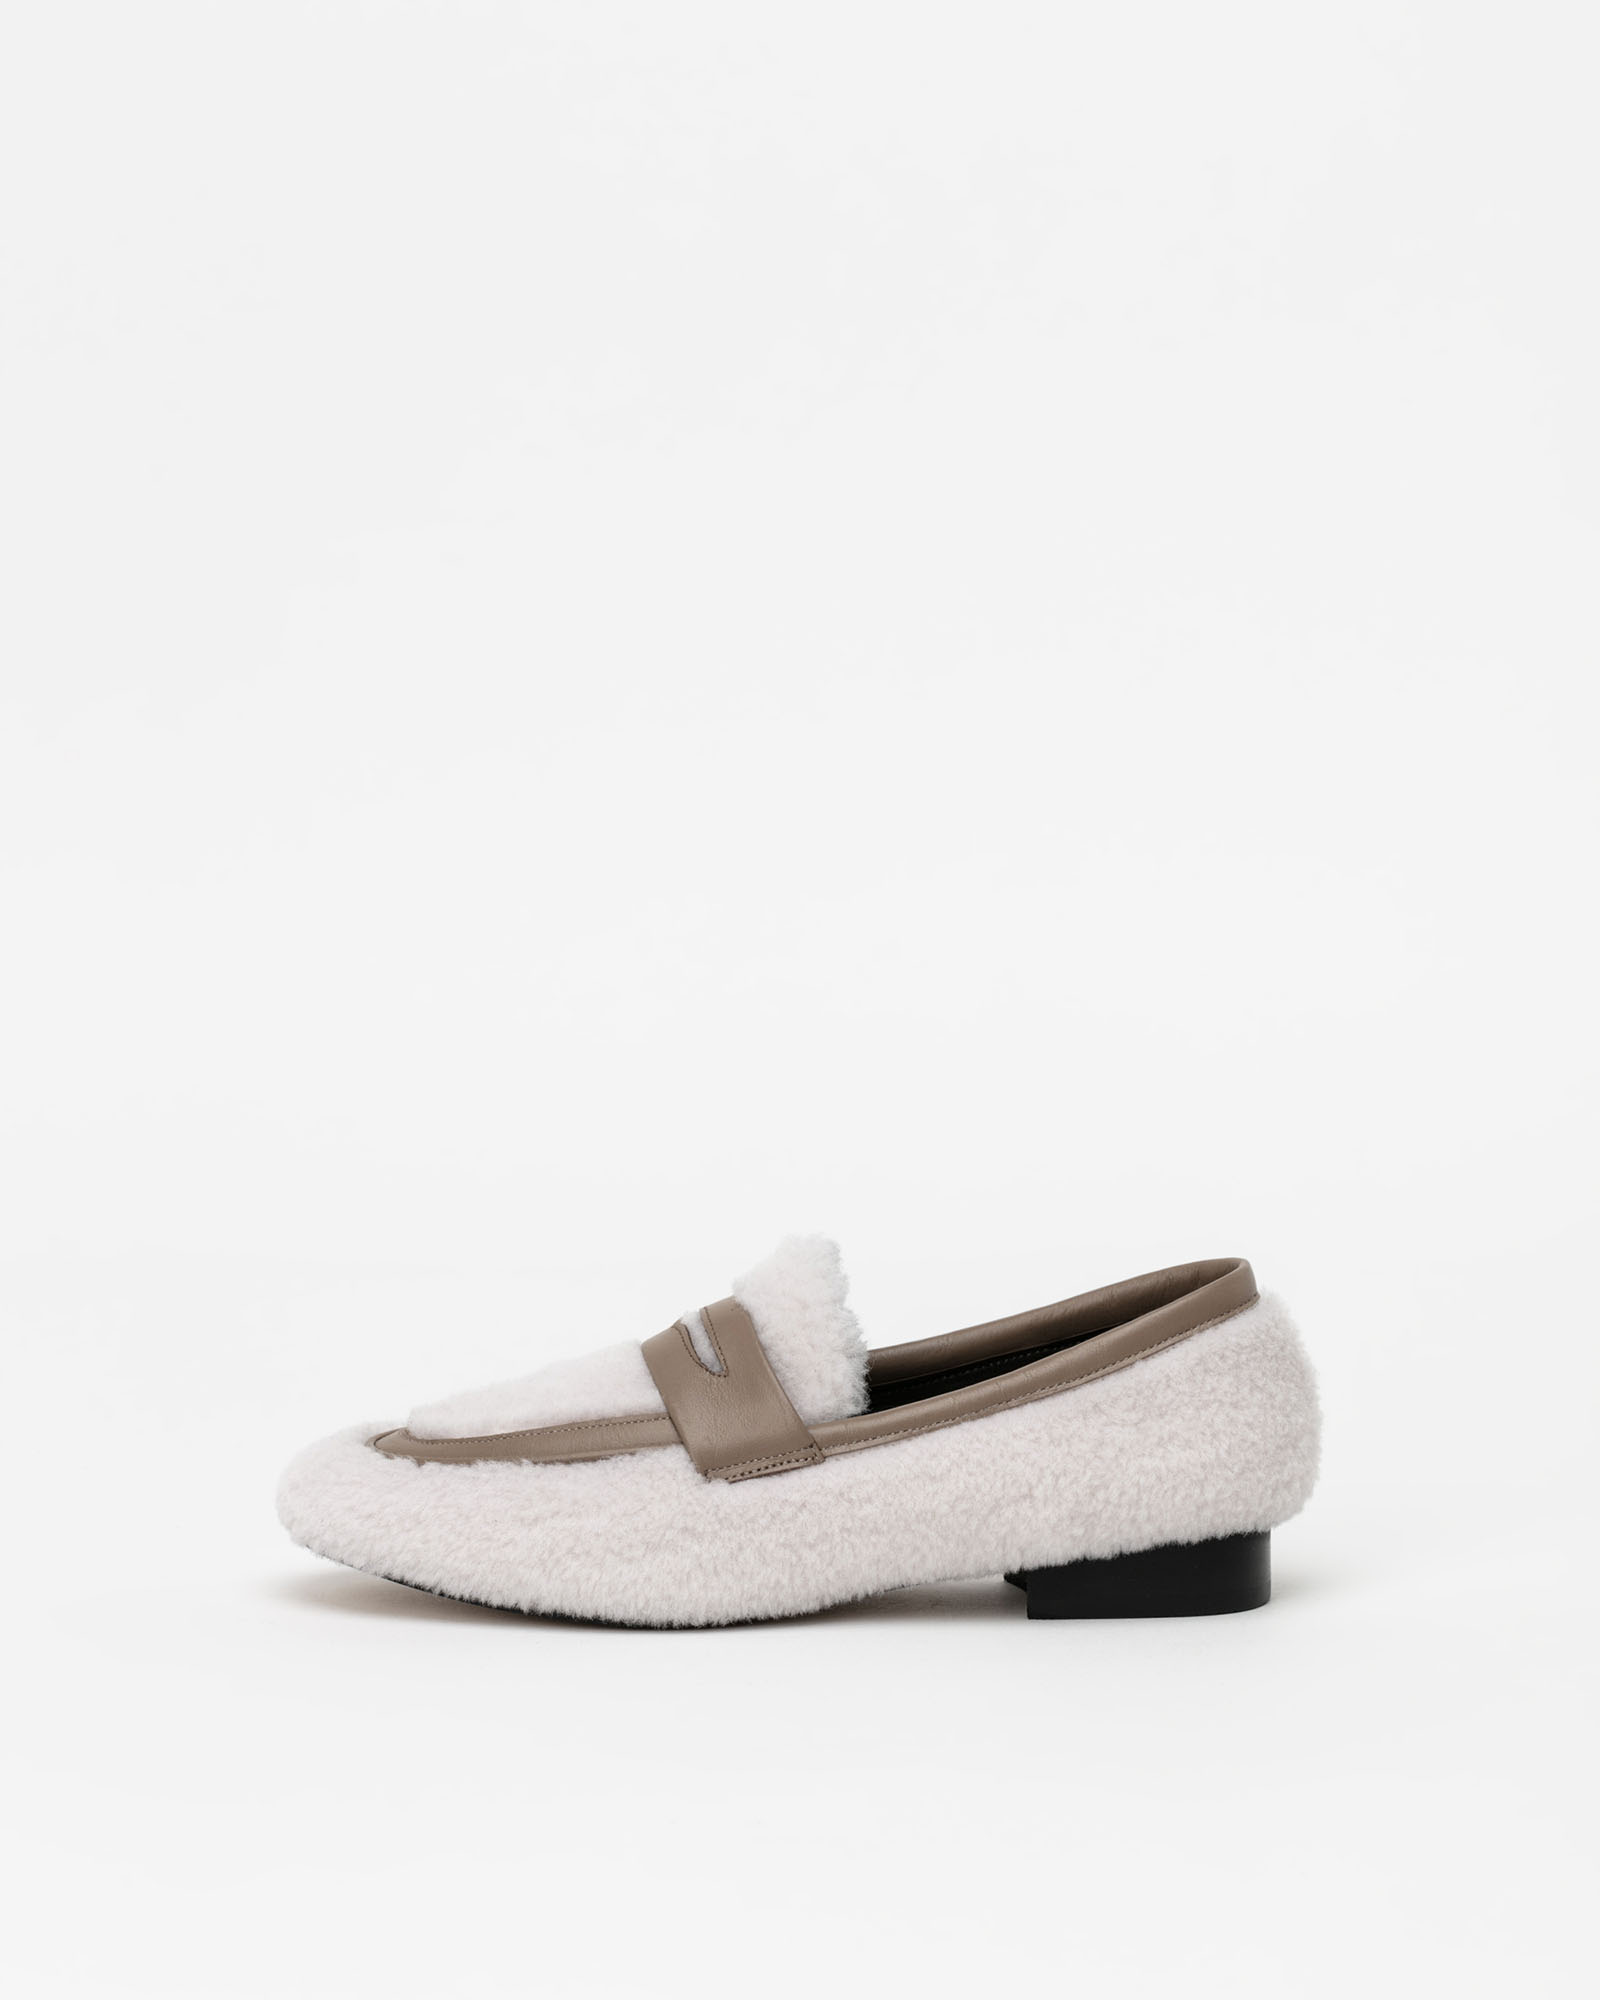 Parkrow Shearling Loafers